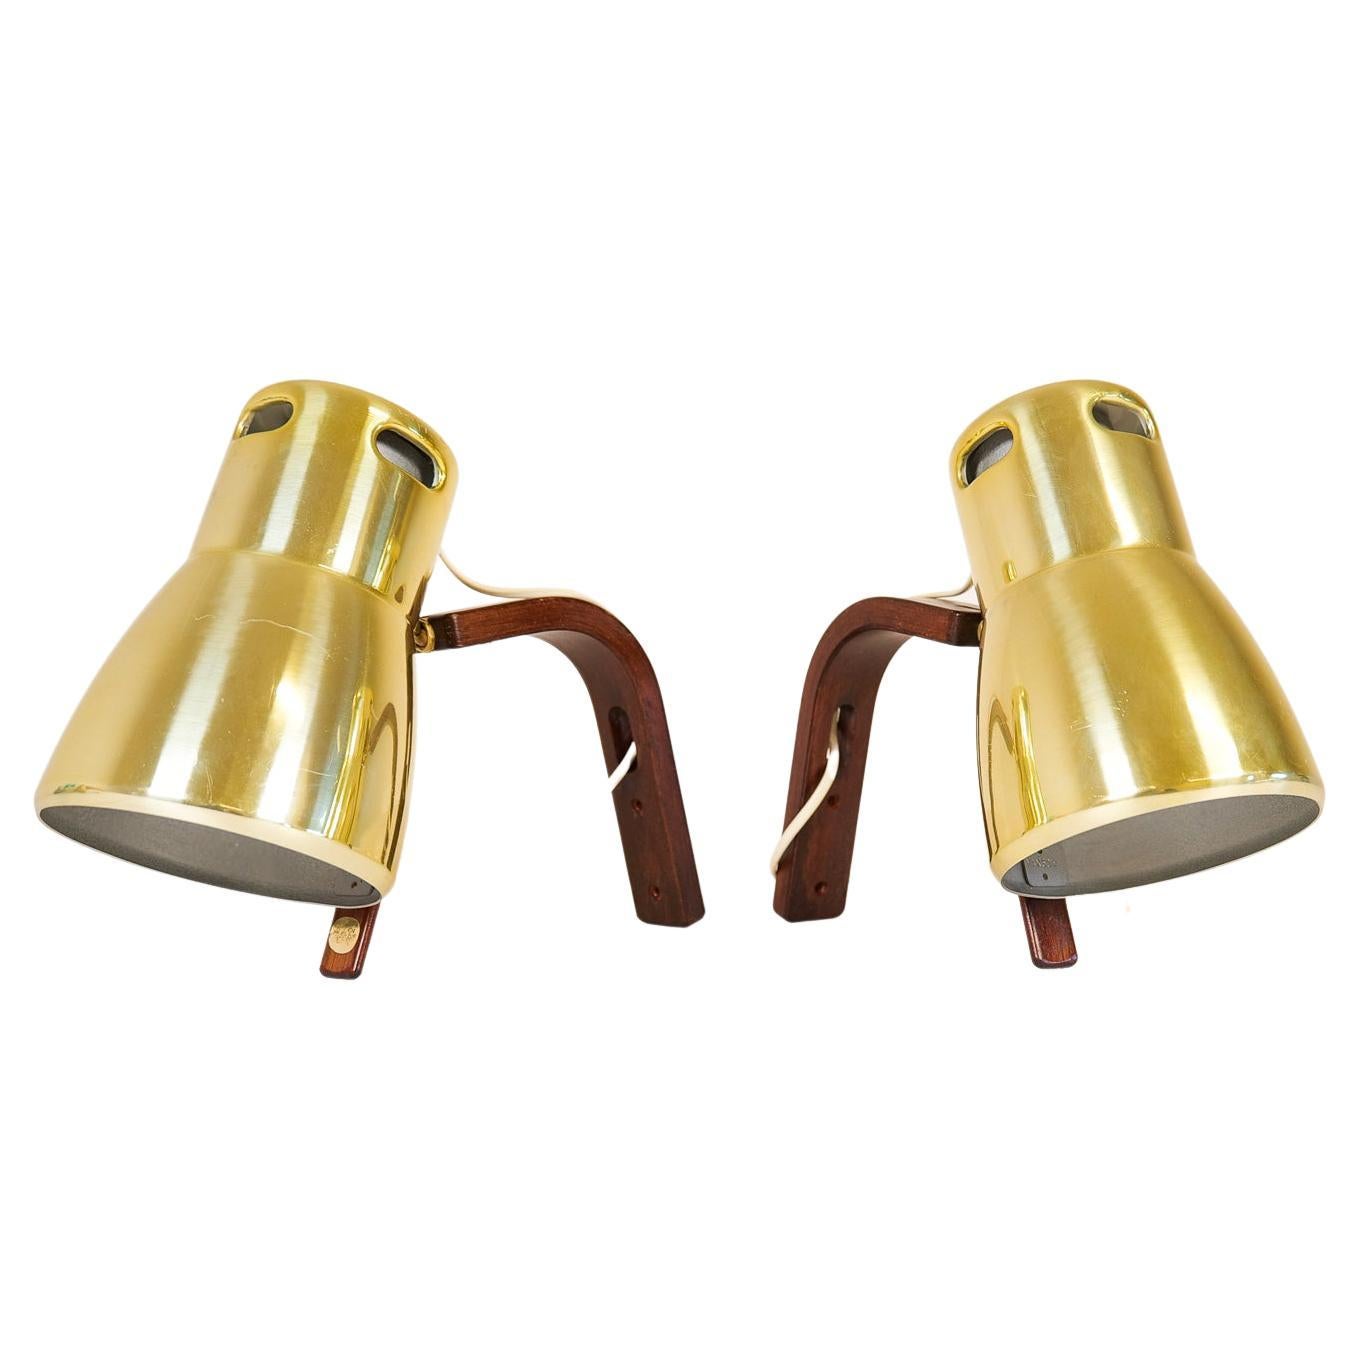 Hans-Agne Jakobsson Brass and Stained Wood Wall Lamps, Sweden, 1970s For Sale